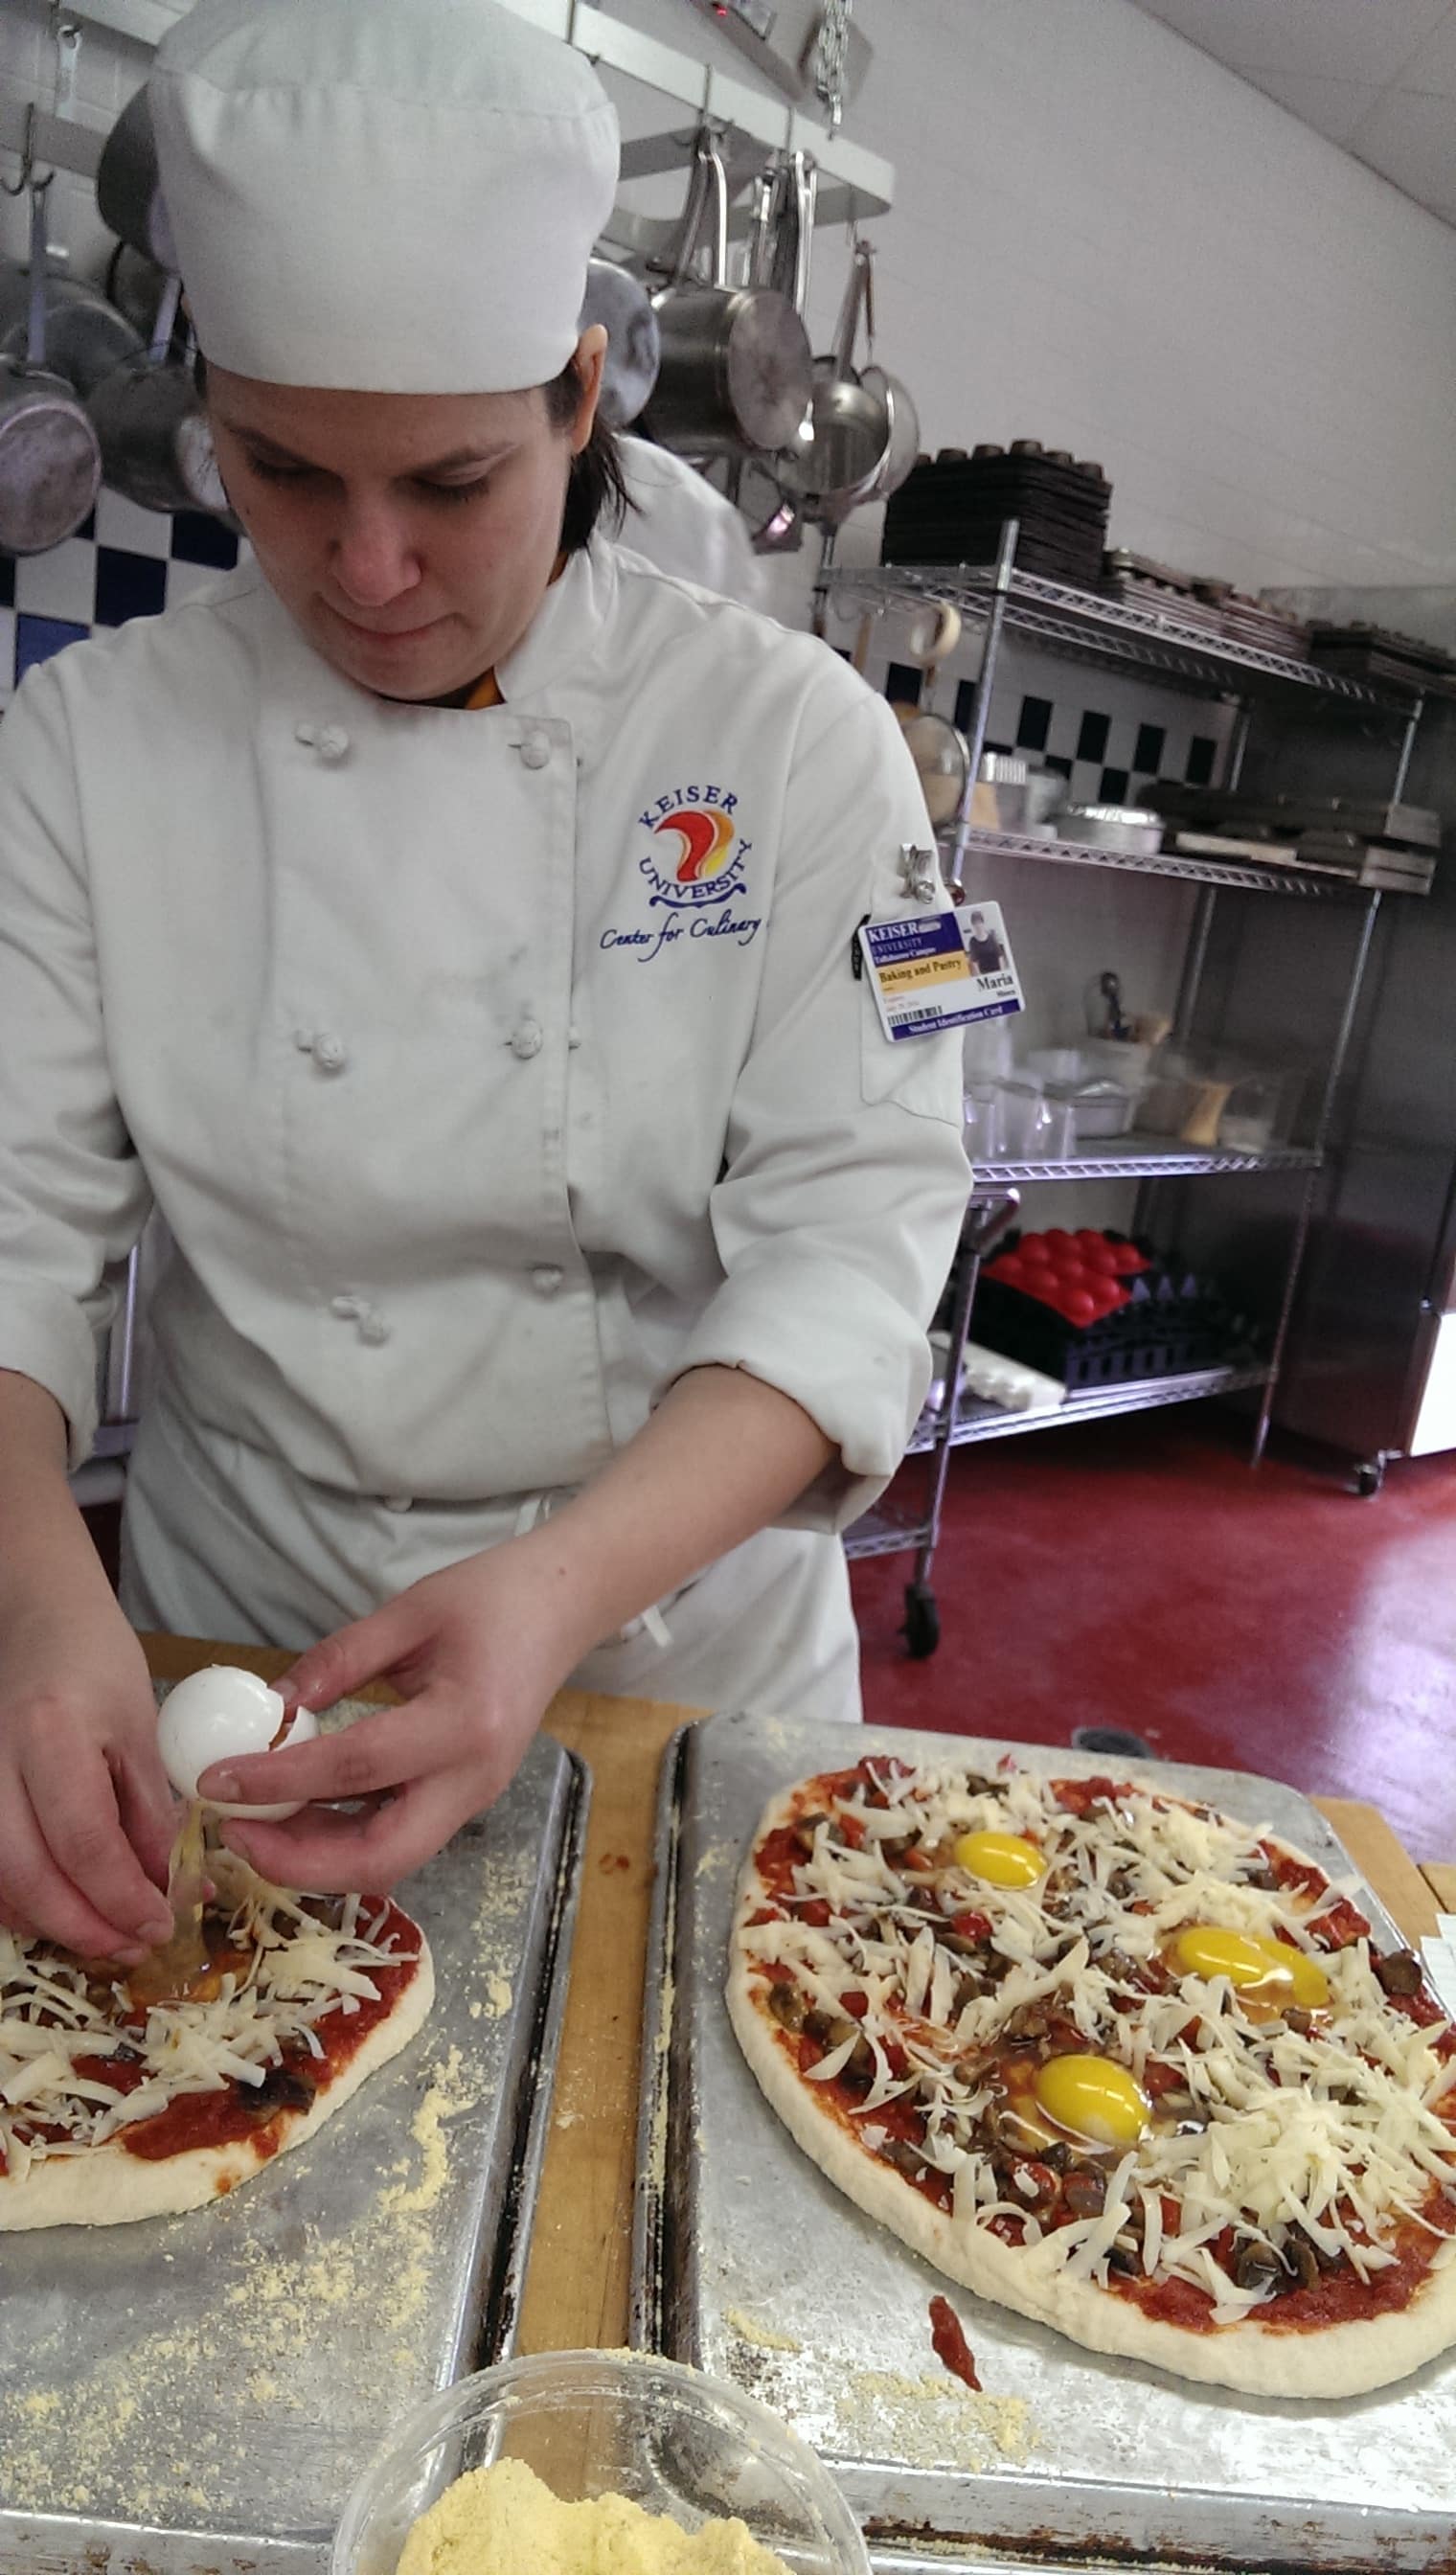 Tallahassee Pastry Students Learn How to Make Specialty Pizzas